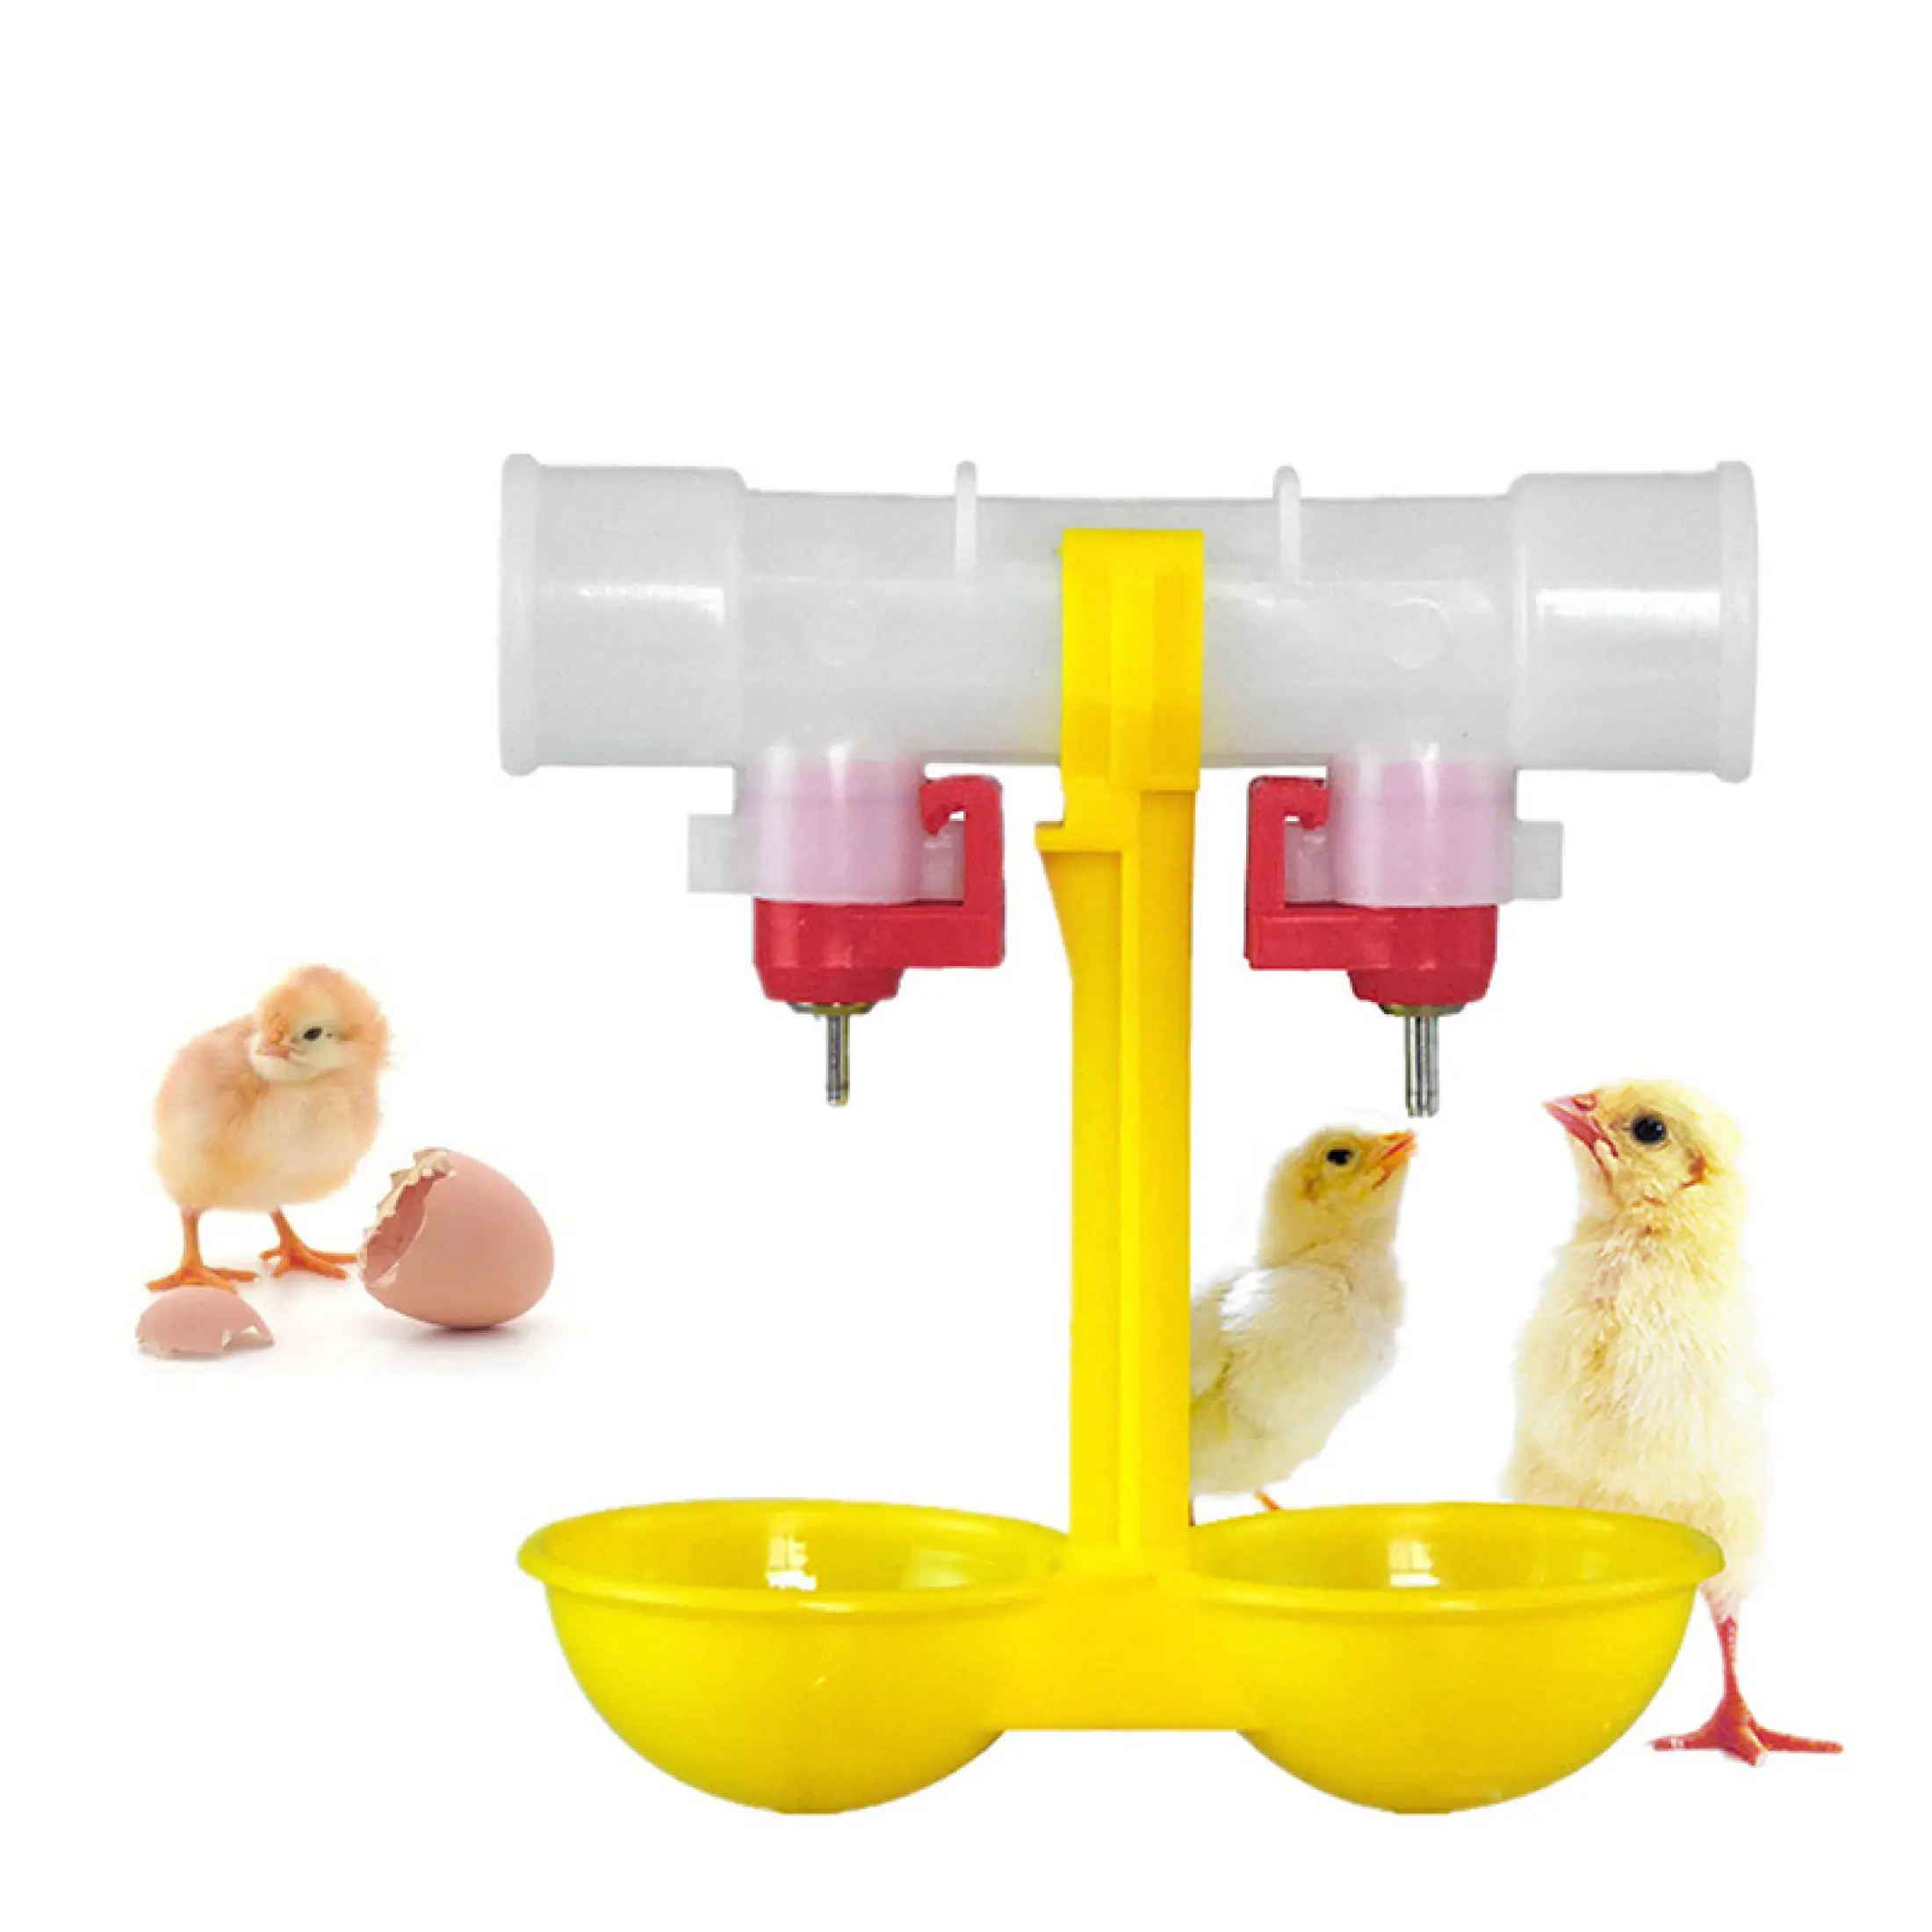 YOUTHINK 10PCS Steel Ball Automatic Nipple Drinking Fountain Ball Valve Type Poultry Dinkers Chicken Water Nipple Drinker Feeders 